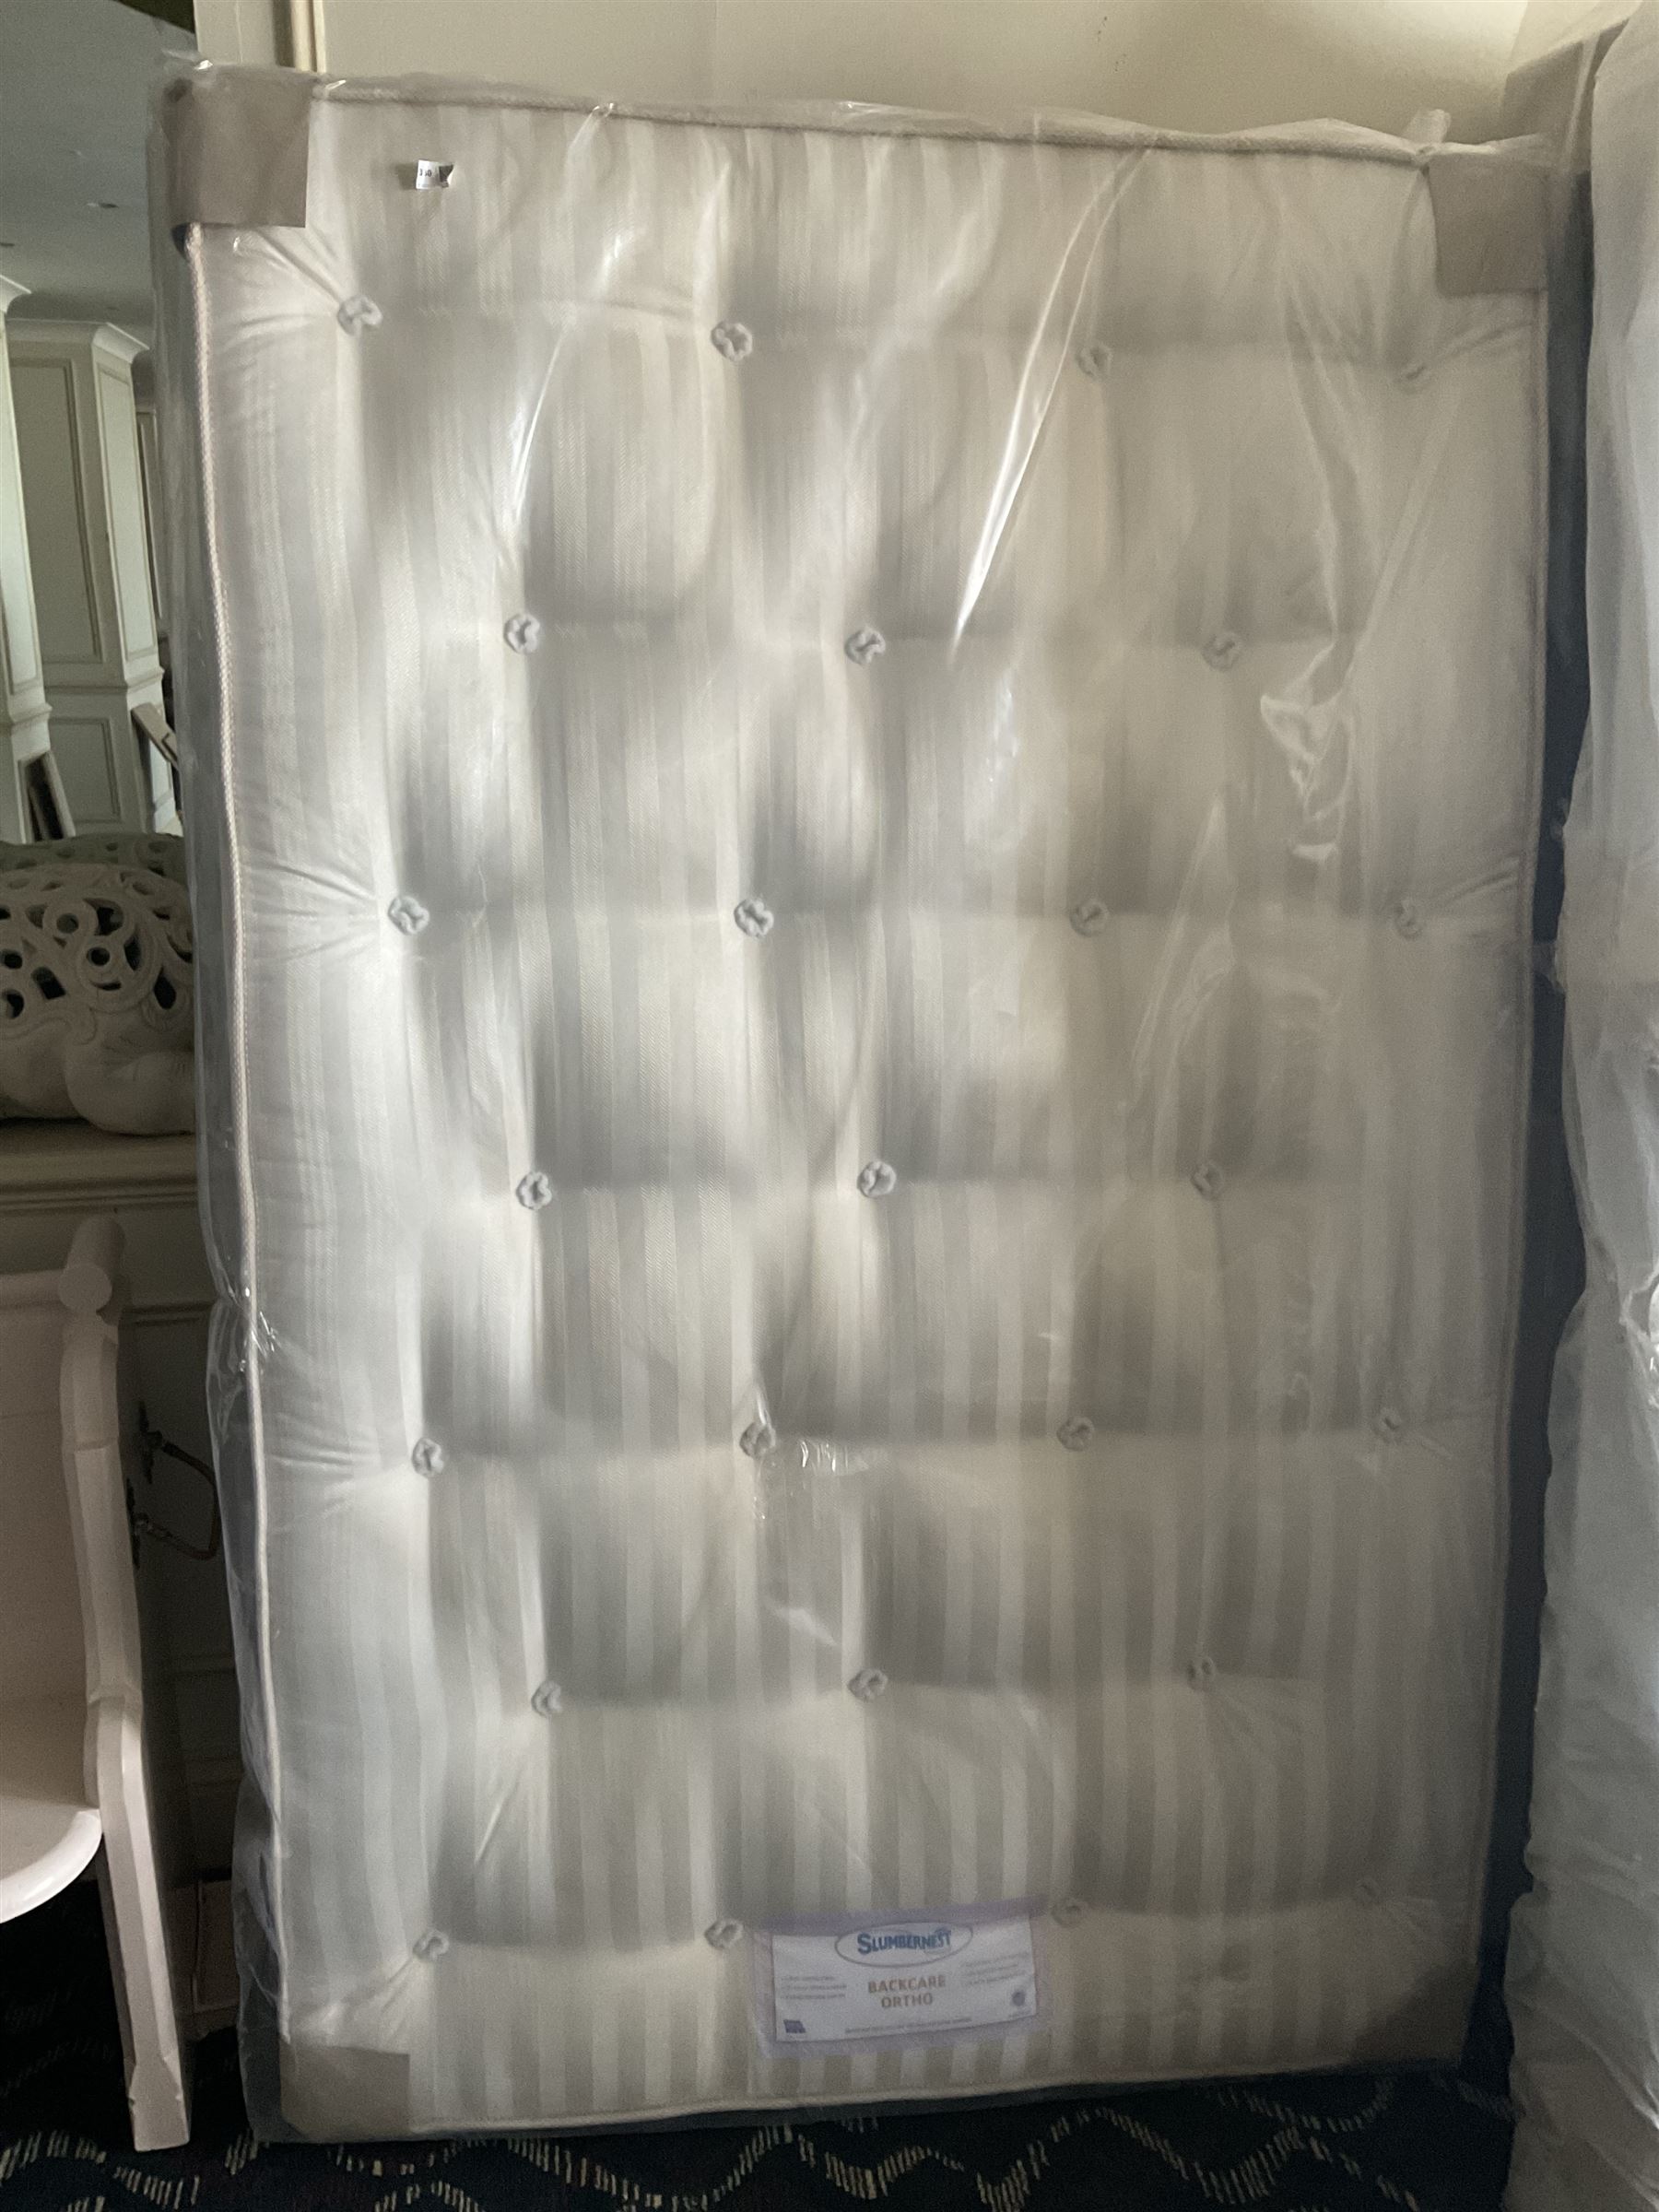 Slumbernest 4' small double mattress- LOT SUBJECT TO VAT ON THE HAMMER PRICE - To be collected by ap